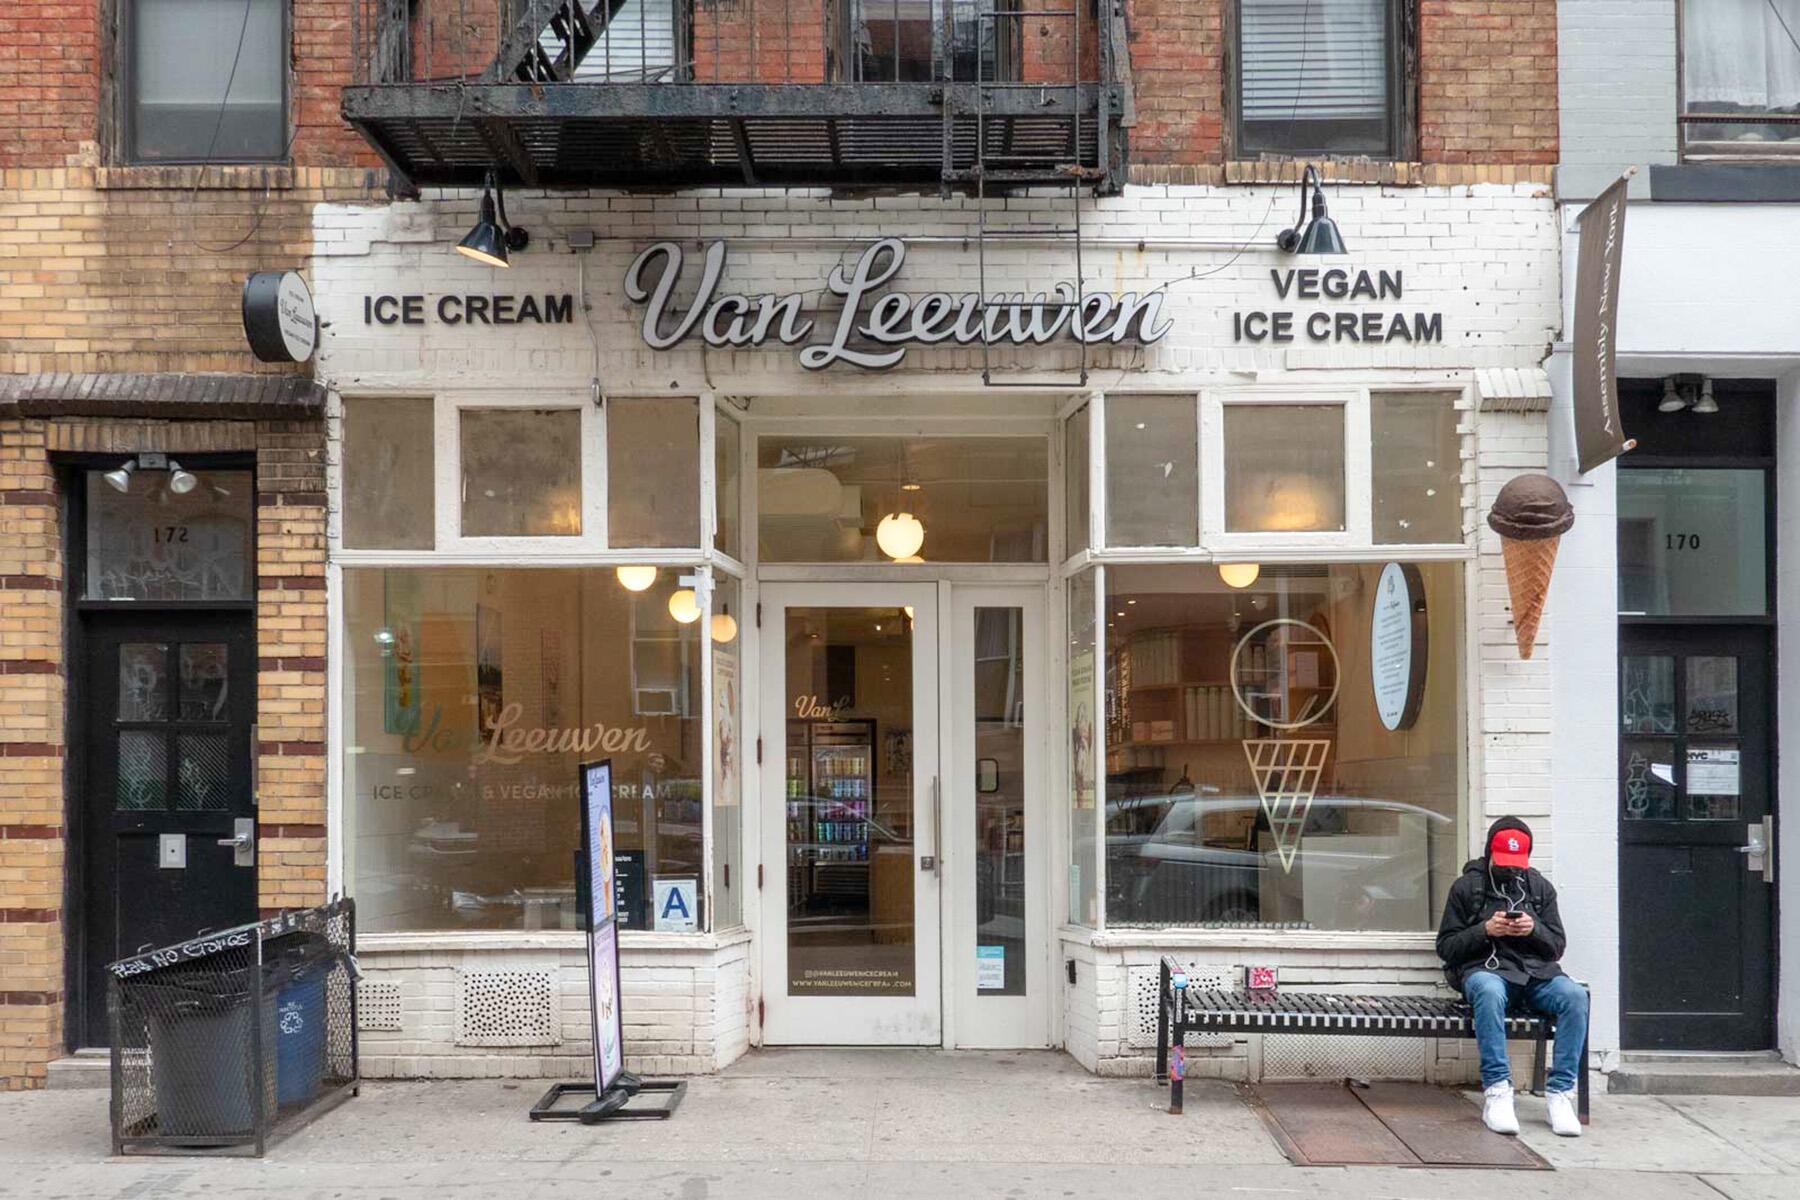 <a href='https://www.fodors.com/world/north-america/usa/new-york/new-york-city/experiences/news/photos/best-places-for-ice-cream-in-new-york-city#'>From &quot;The 12 Best Places for Ice Cream in New York City: Van Leeuwen Ice Cream&quot;</a>